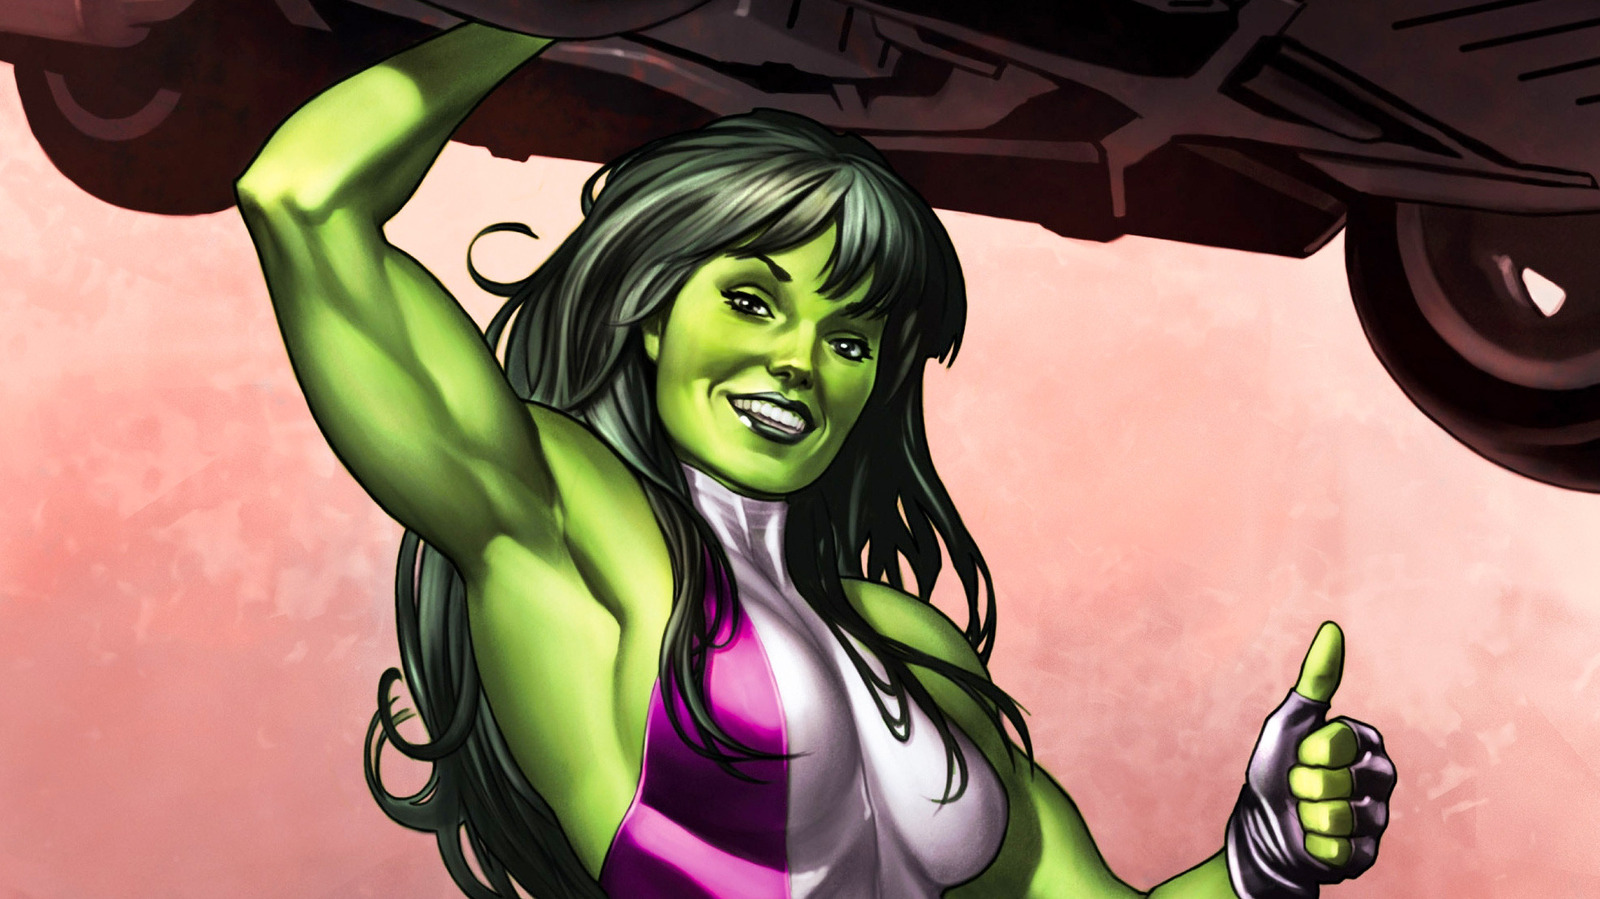 She Hulk in one of Top 10 Marvel Characters that deserve their own film